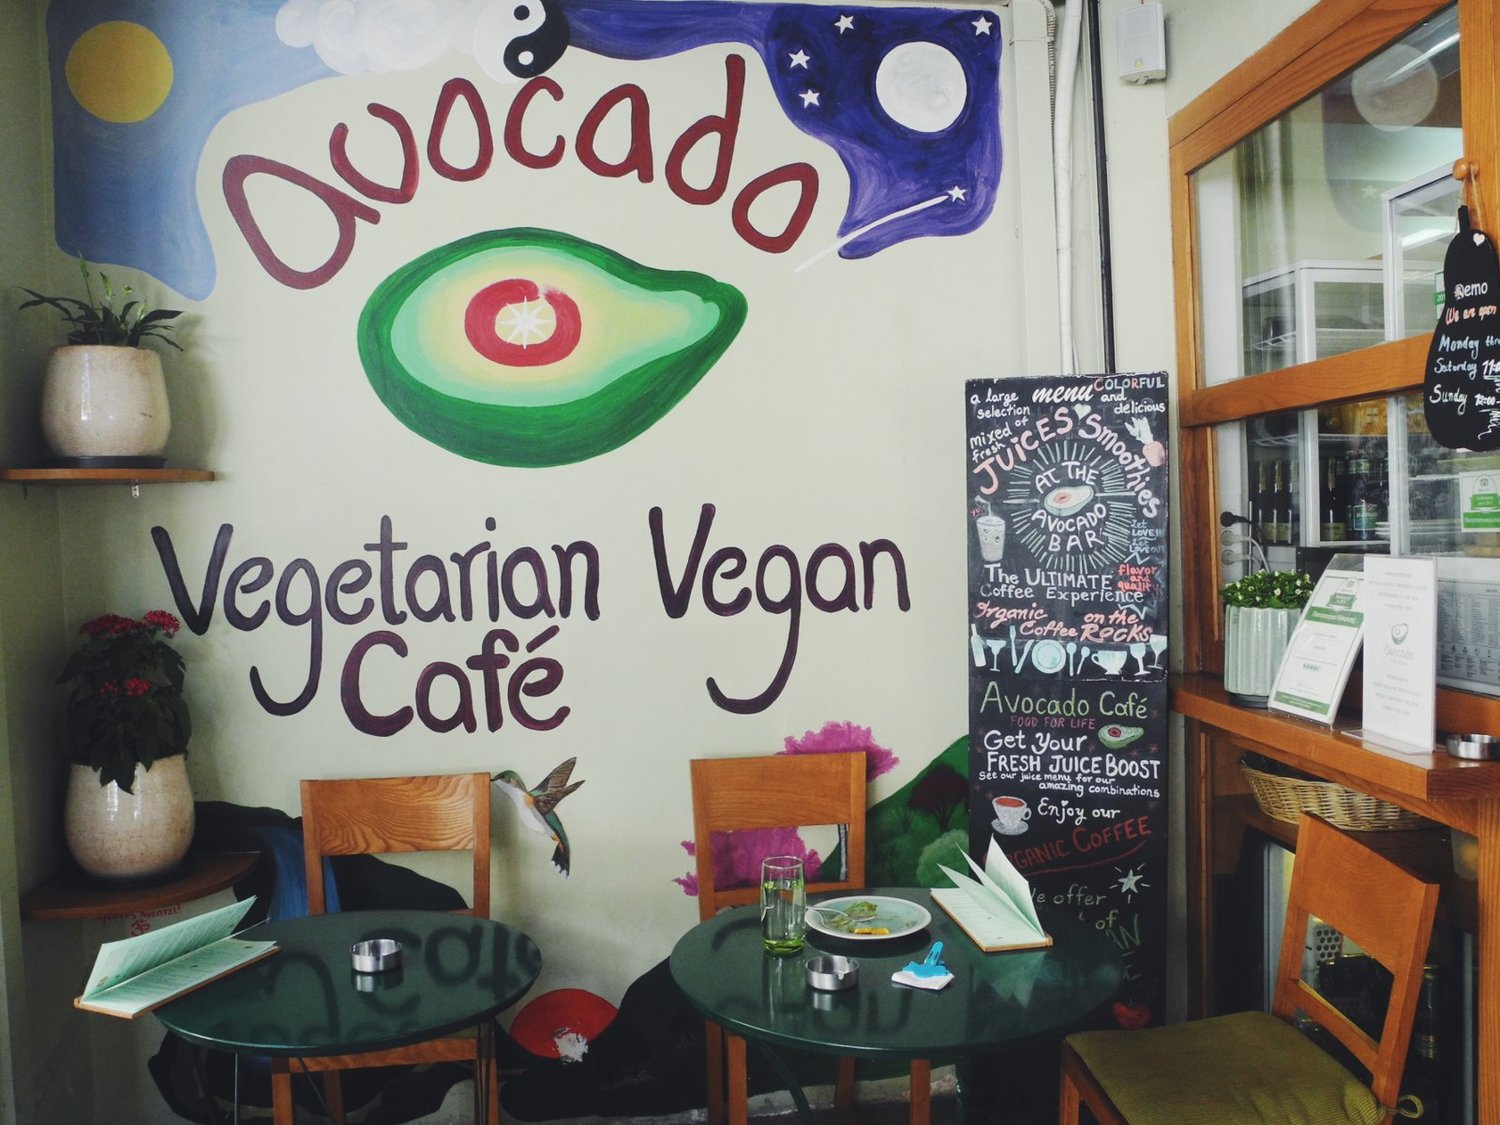 Avocado cafe and restaurant has been voted the best and most delicious cruelty-free food restaurant in Athens. Image source: fromatovegan.wordpress.com